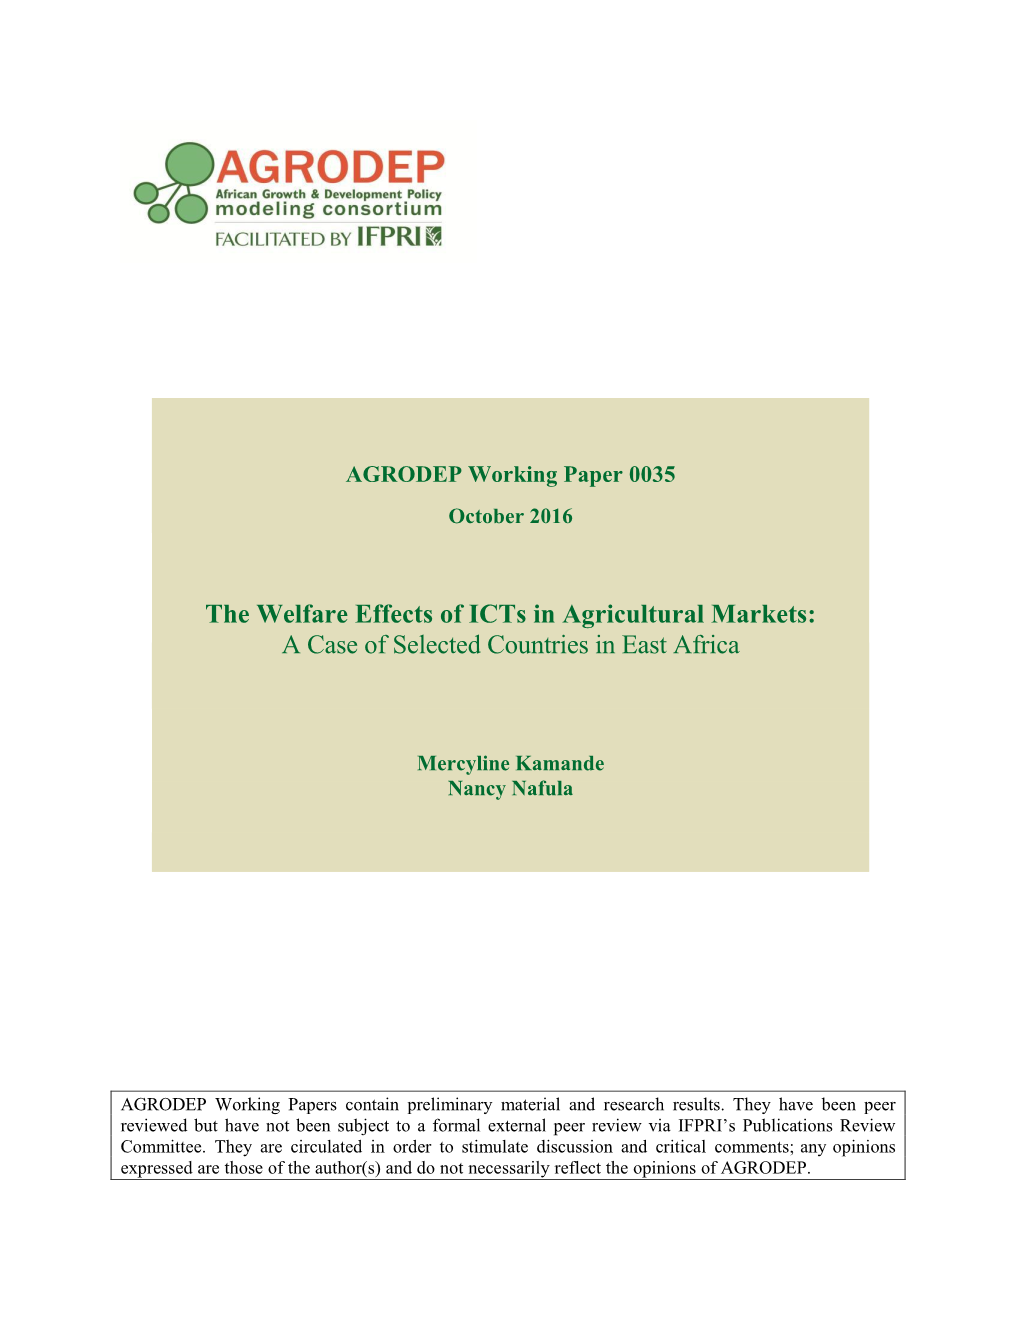 The Welfare Effects of Icts in Agricultural Markets: a Case of Selected Countries in East Africa